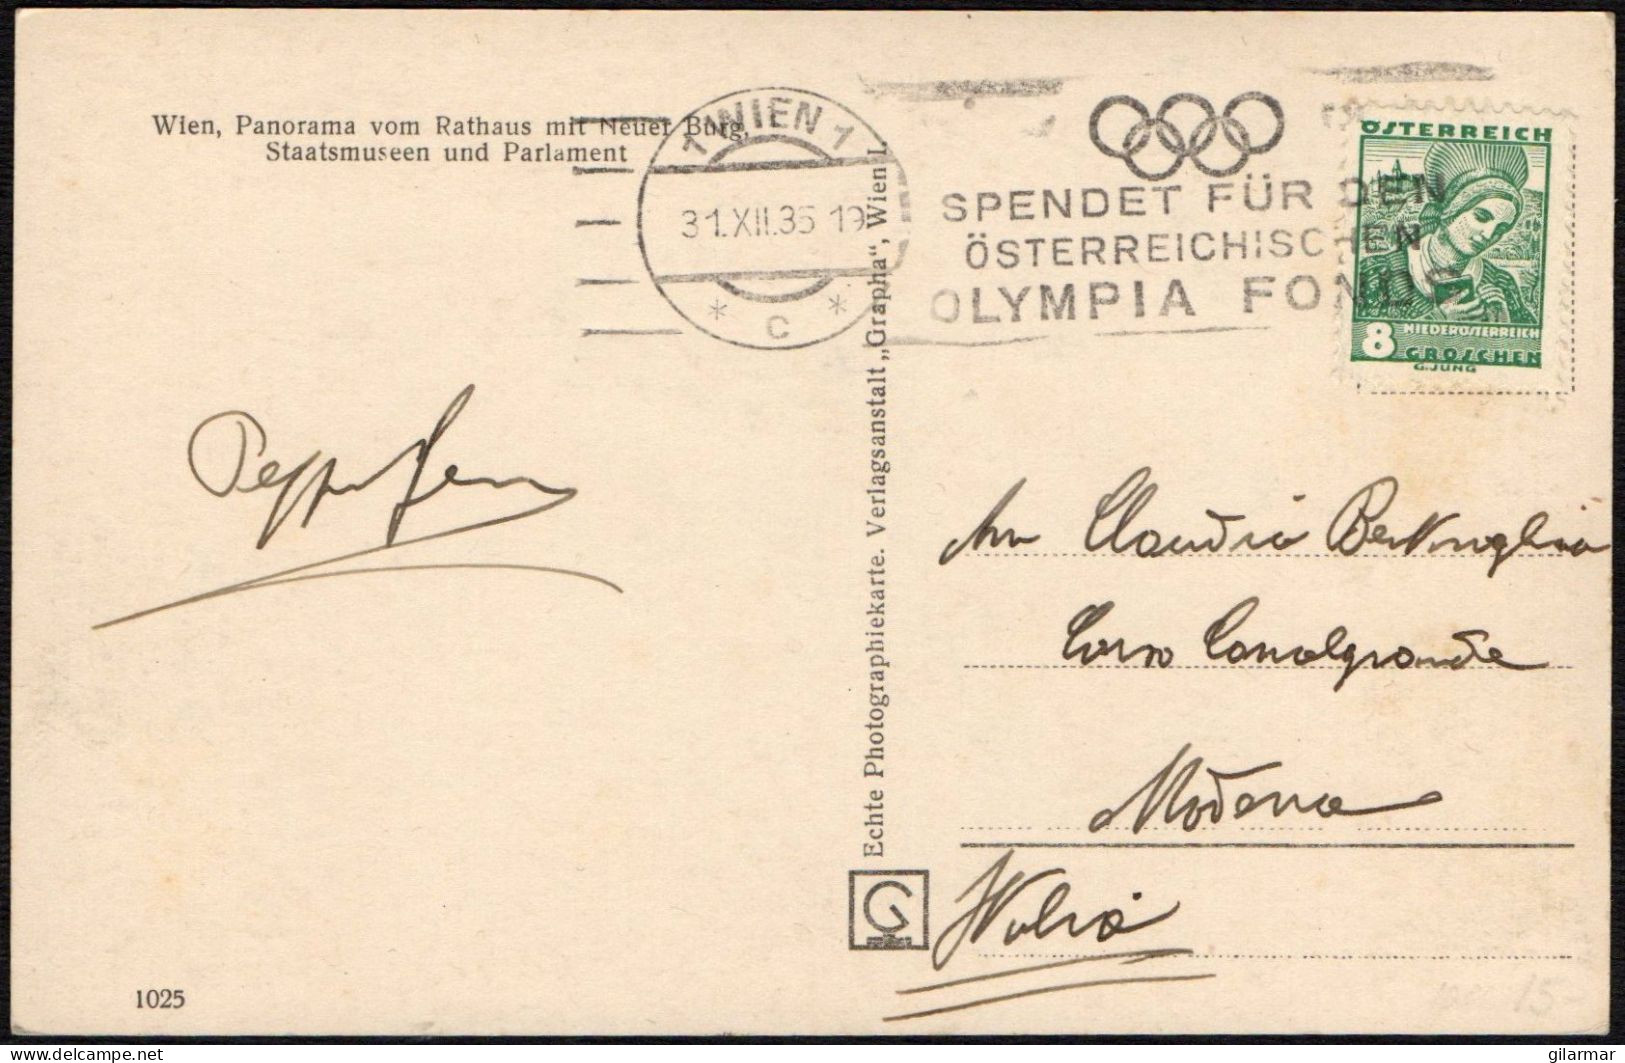 OLYMPIC GAMES 1936 - AUSTRIA WIEN 1 C 1935 - DONATE TO THE AUSTRIAN OLYMPIC FUND - MAILED POSTCARD - M - Summer 1936: Berlin